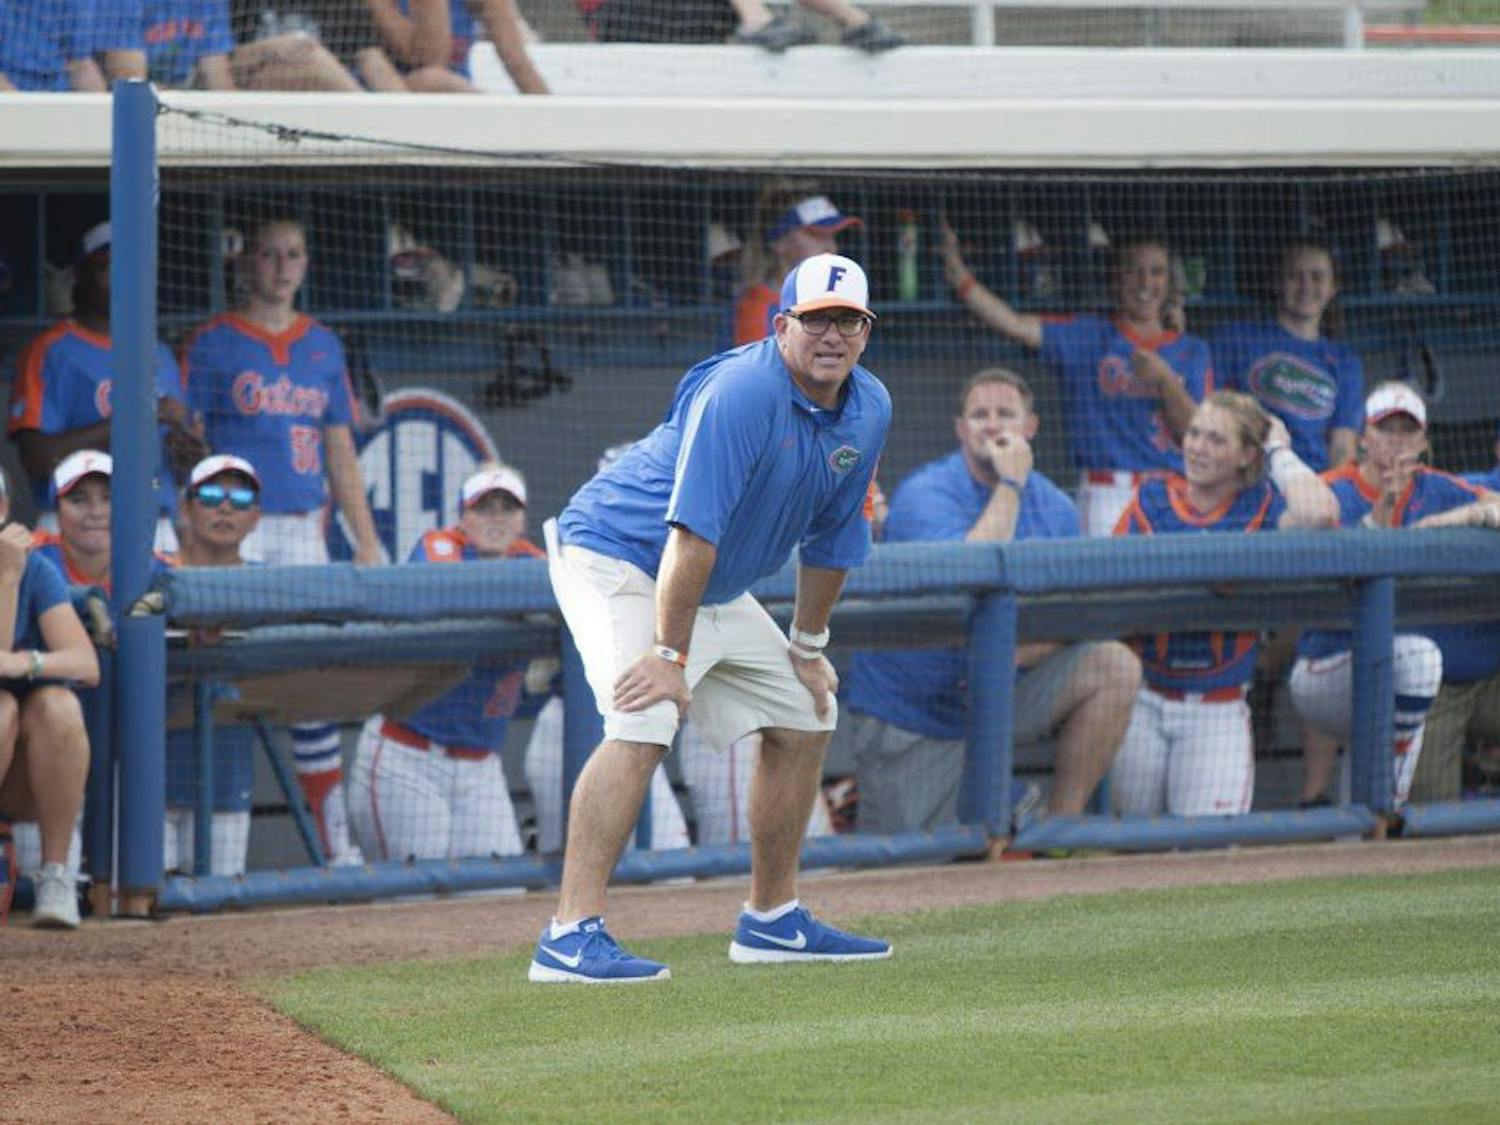 UF head coach Tim Walton puts his hands on his knees during Florida's 15-7 win against Bethune-Cookman on Wednesday night at Katie Seashole Pressly Stadium.